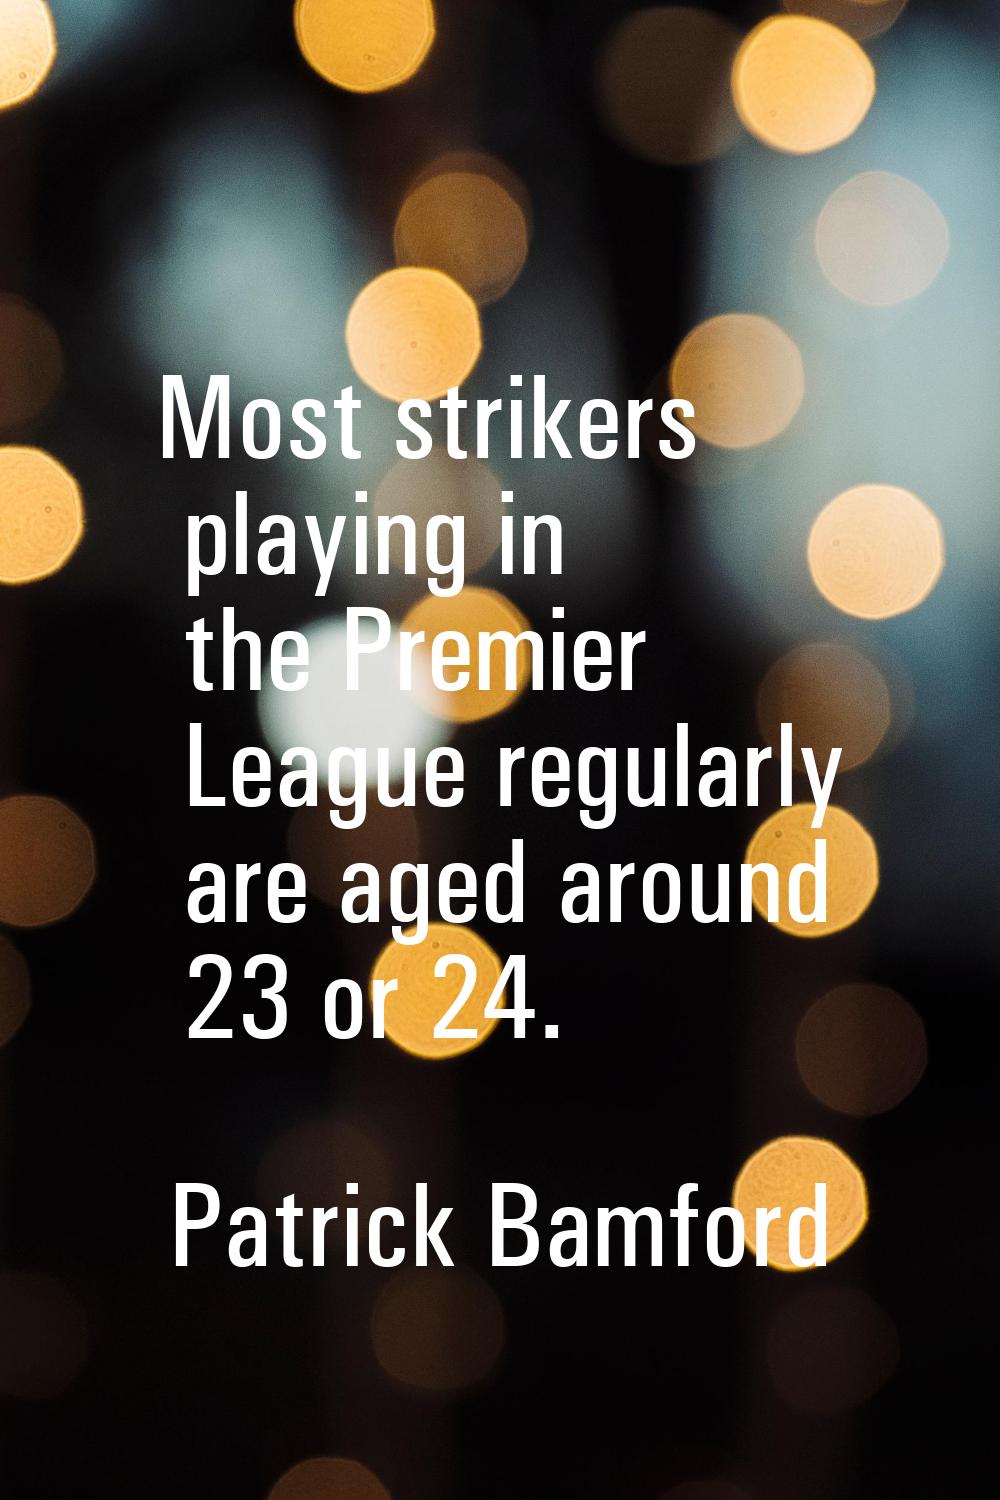 Most strikers playing in the Premier League regularly are aged around 23 or 24.